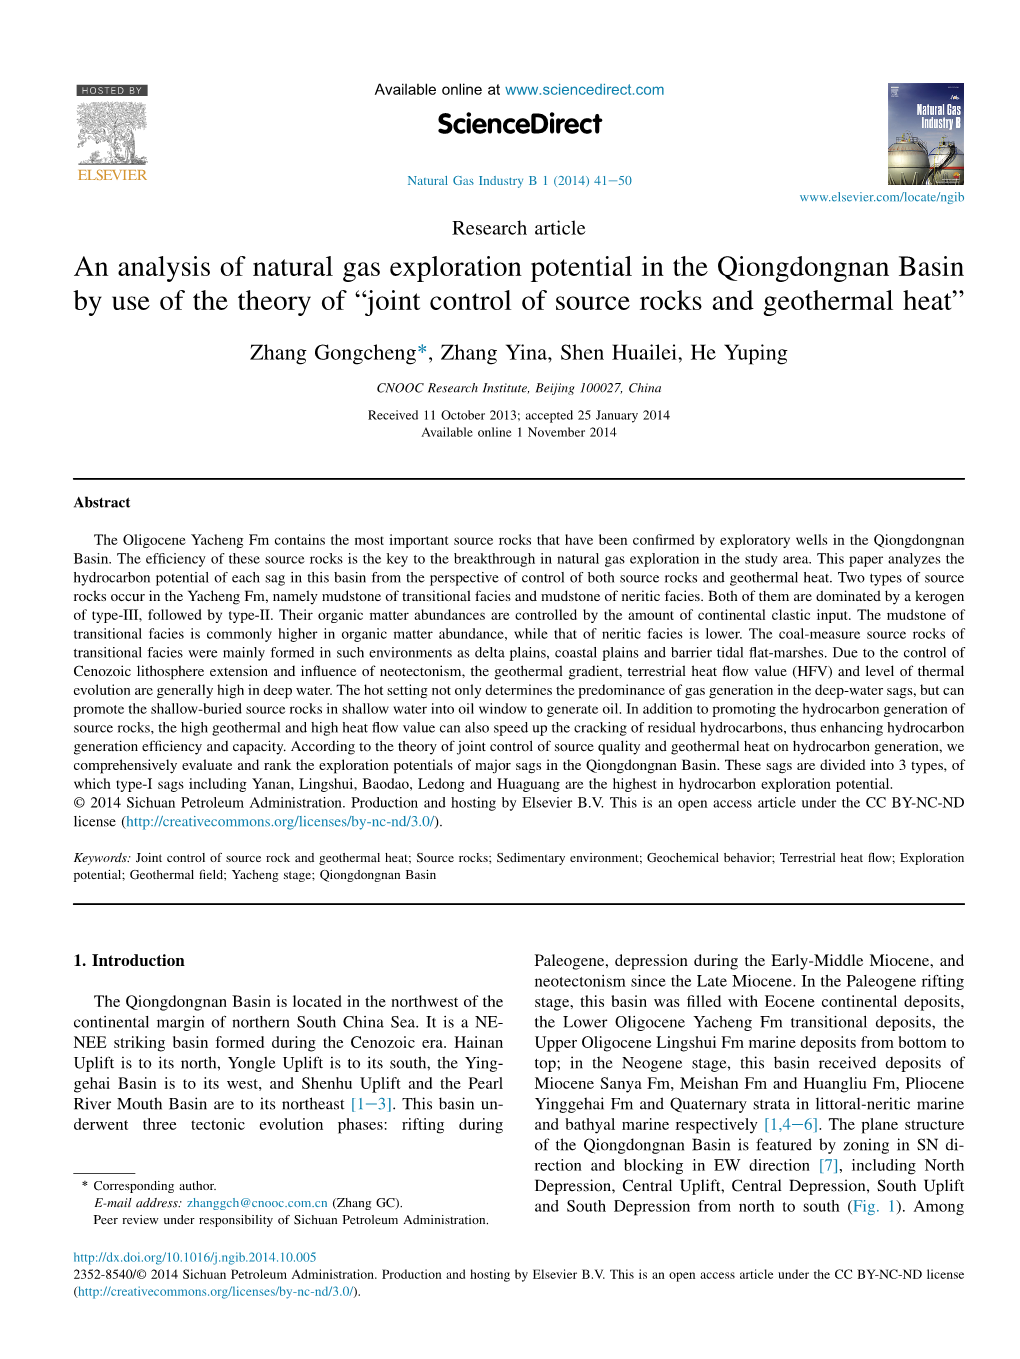 An Analysis of Natural Gas Exploration Potential in the Qiongdongnan Basin by Use of the Theory of “Joint Control of Source Rocks and Geothermal Heat”